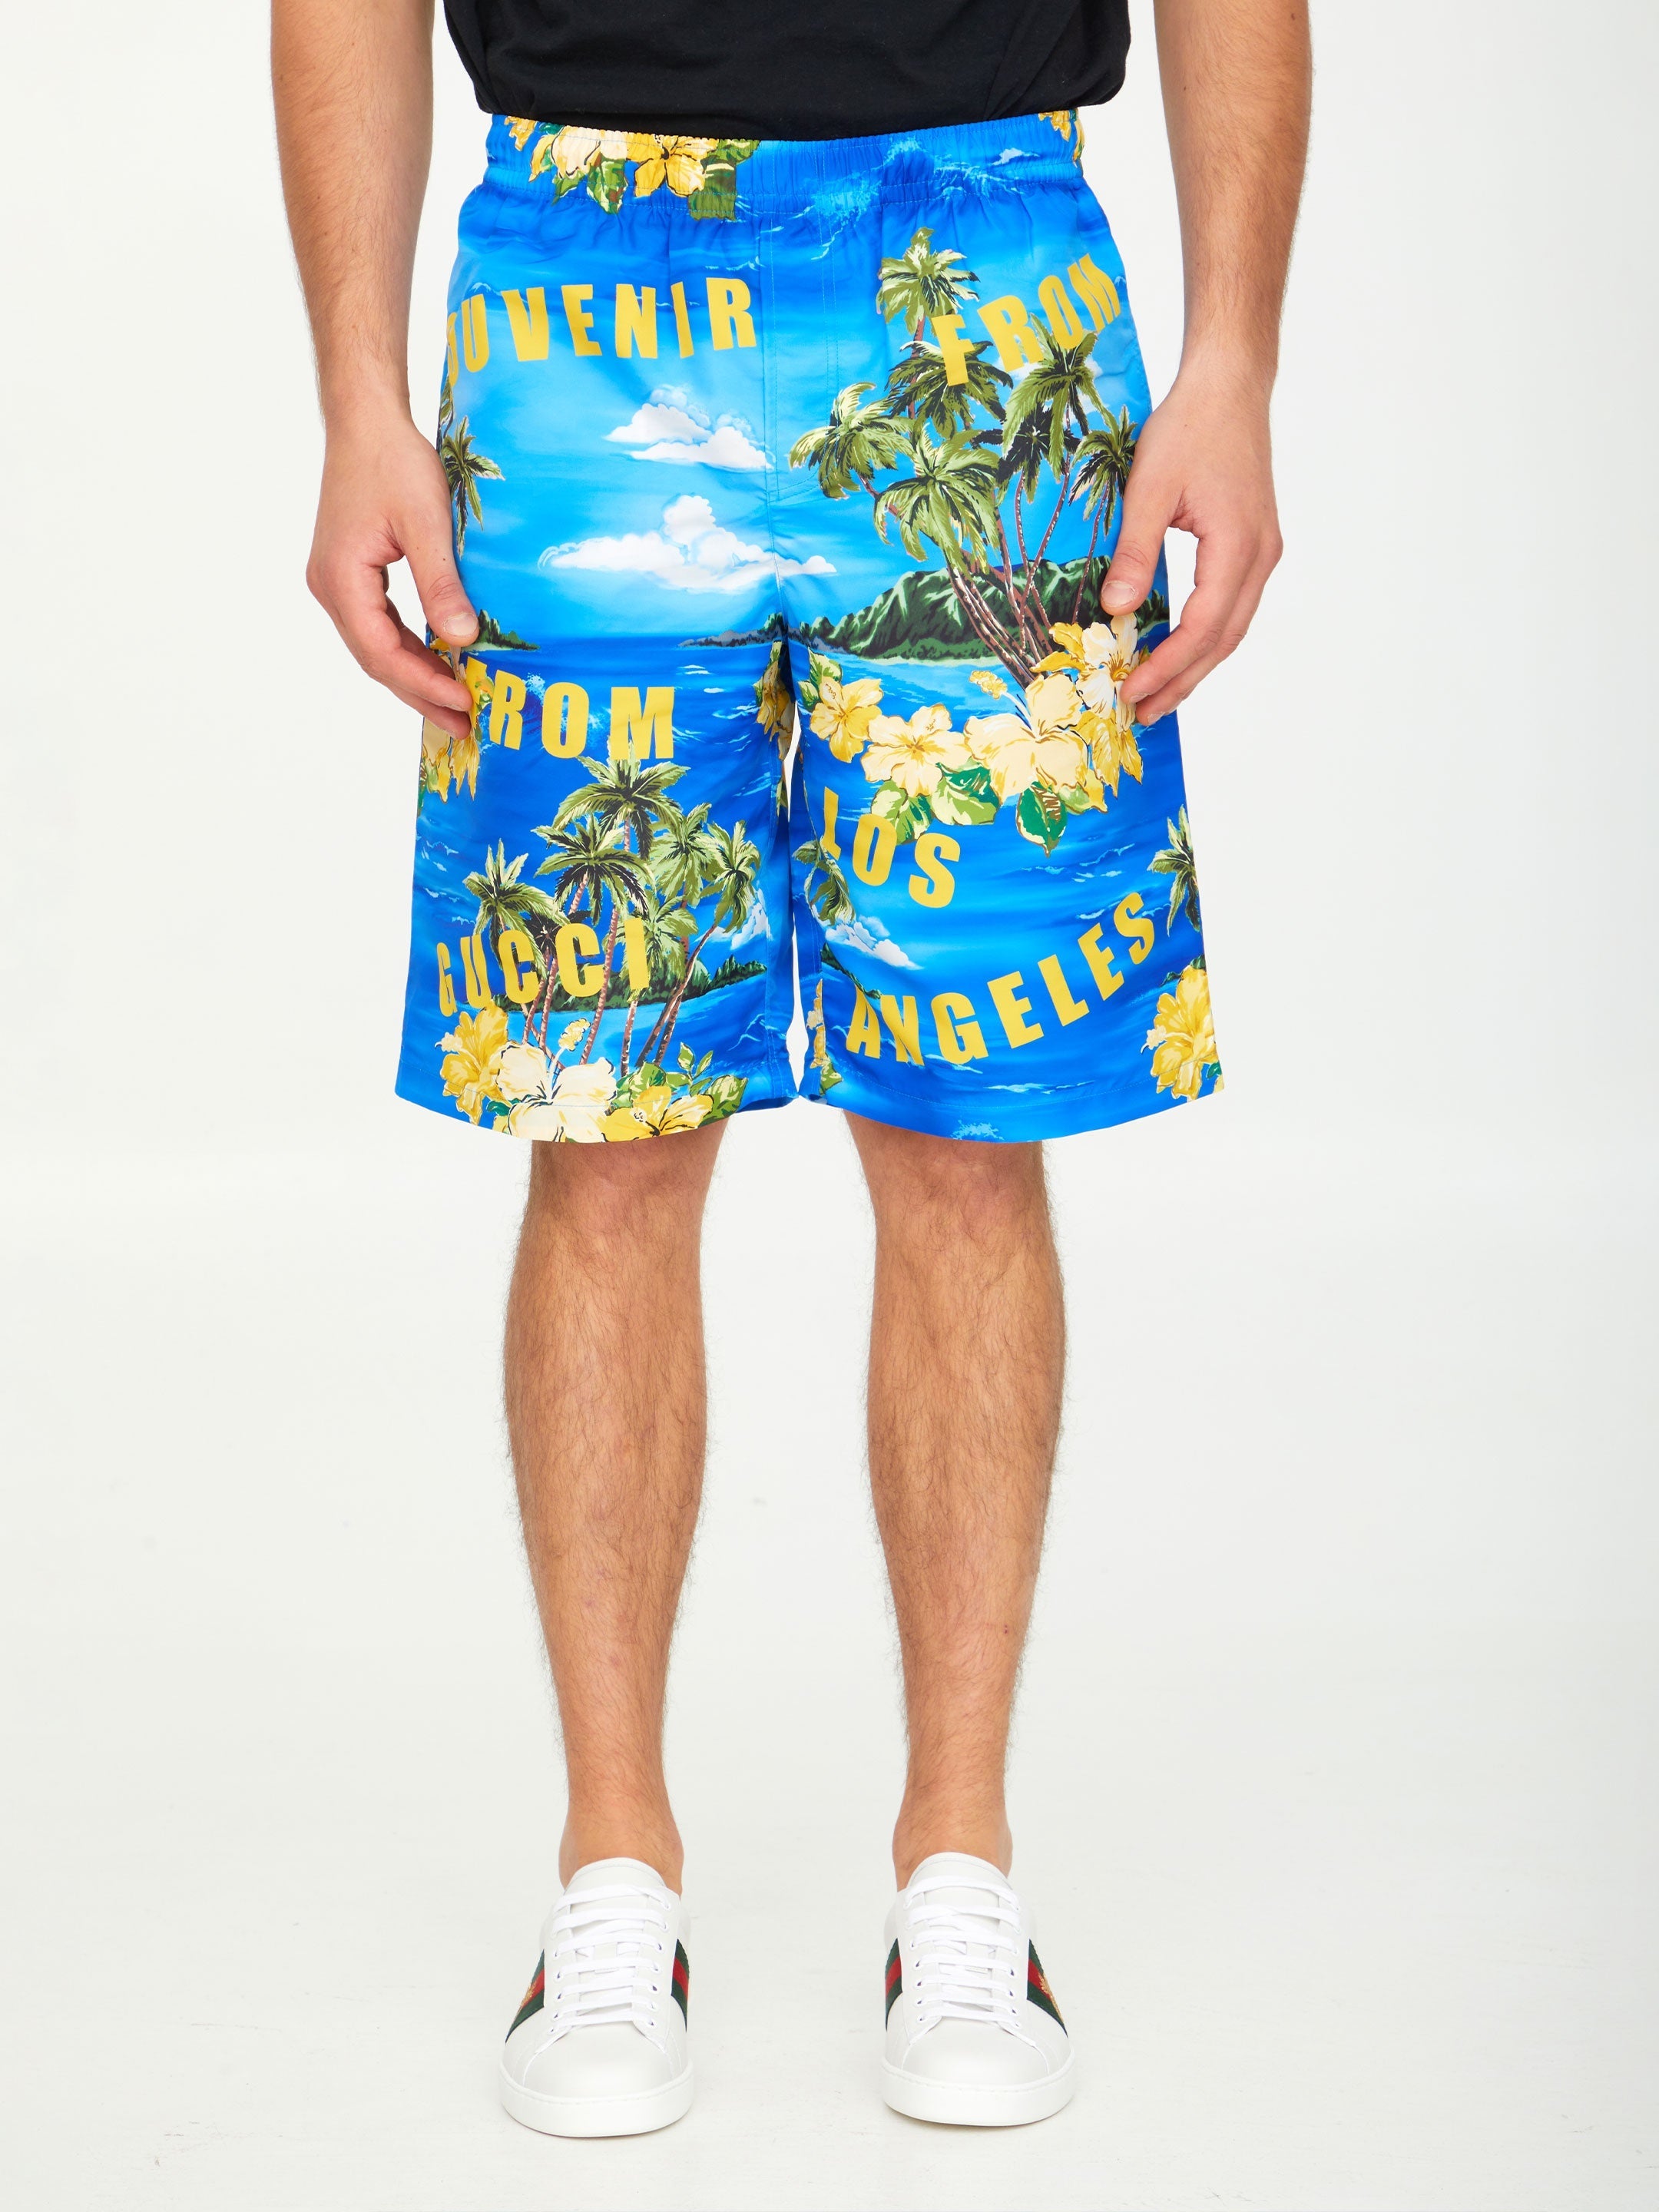 GUCCI-OUTLET-SALE-Printed-nylon-swim-shorts-Hosen-48-BLUE-ARCHIVE-COLLECTION.jpg